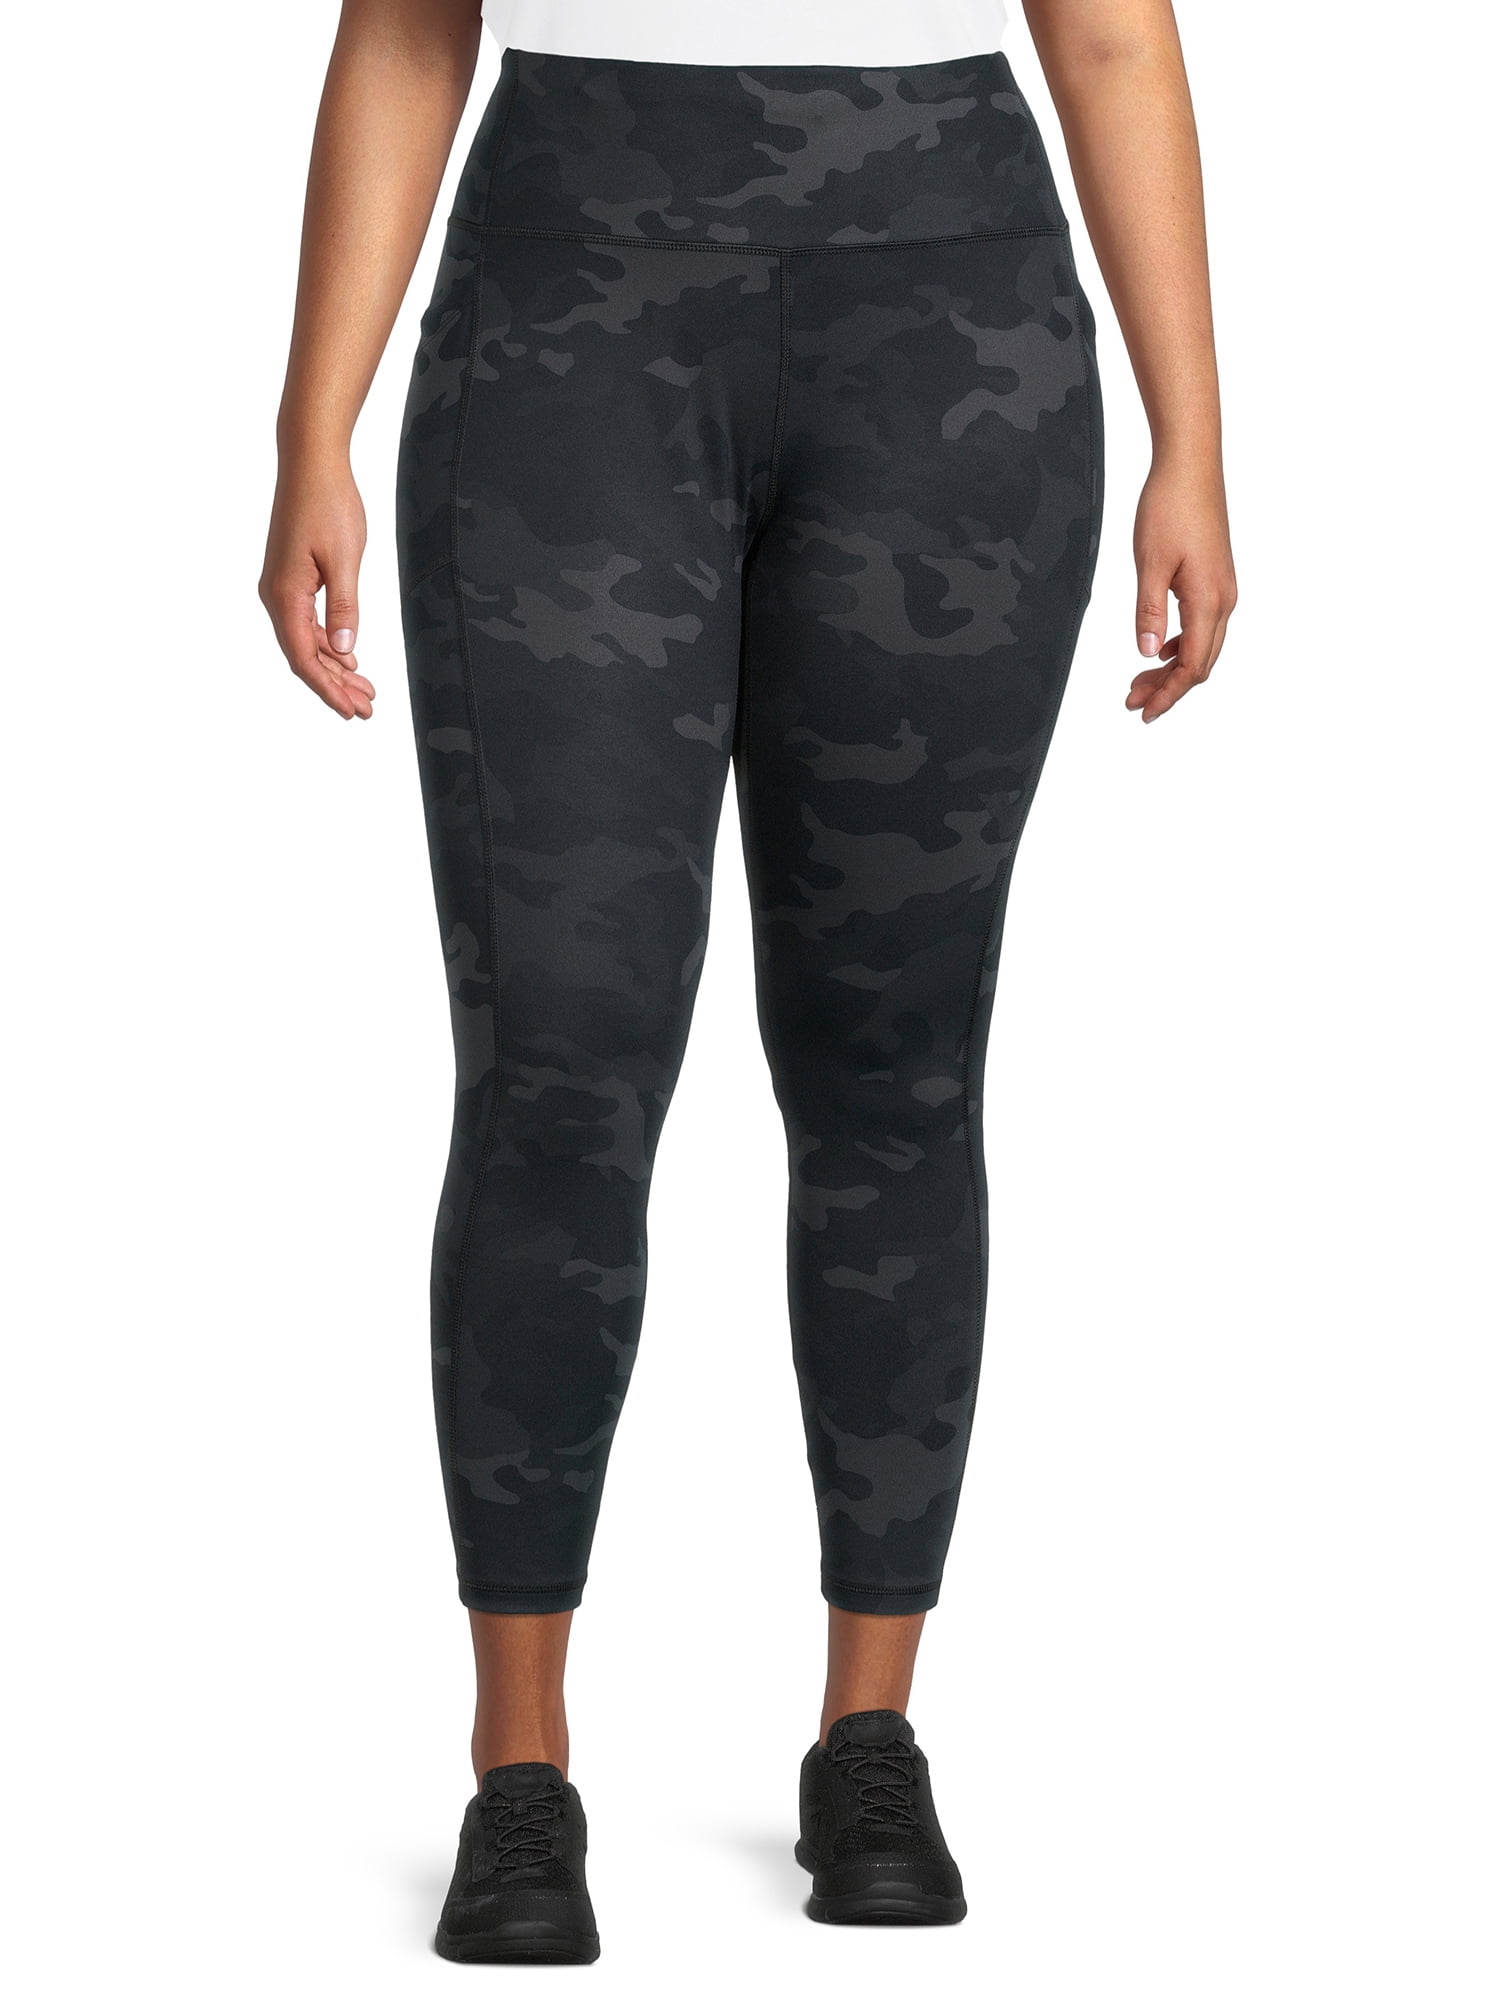 Avia Women's Plus Size 25 Cropped Active Leggings with Pockets